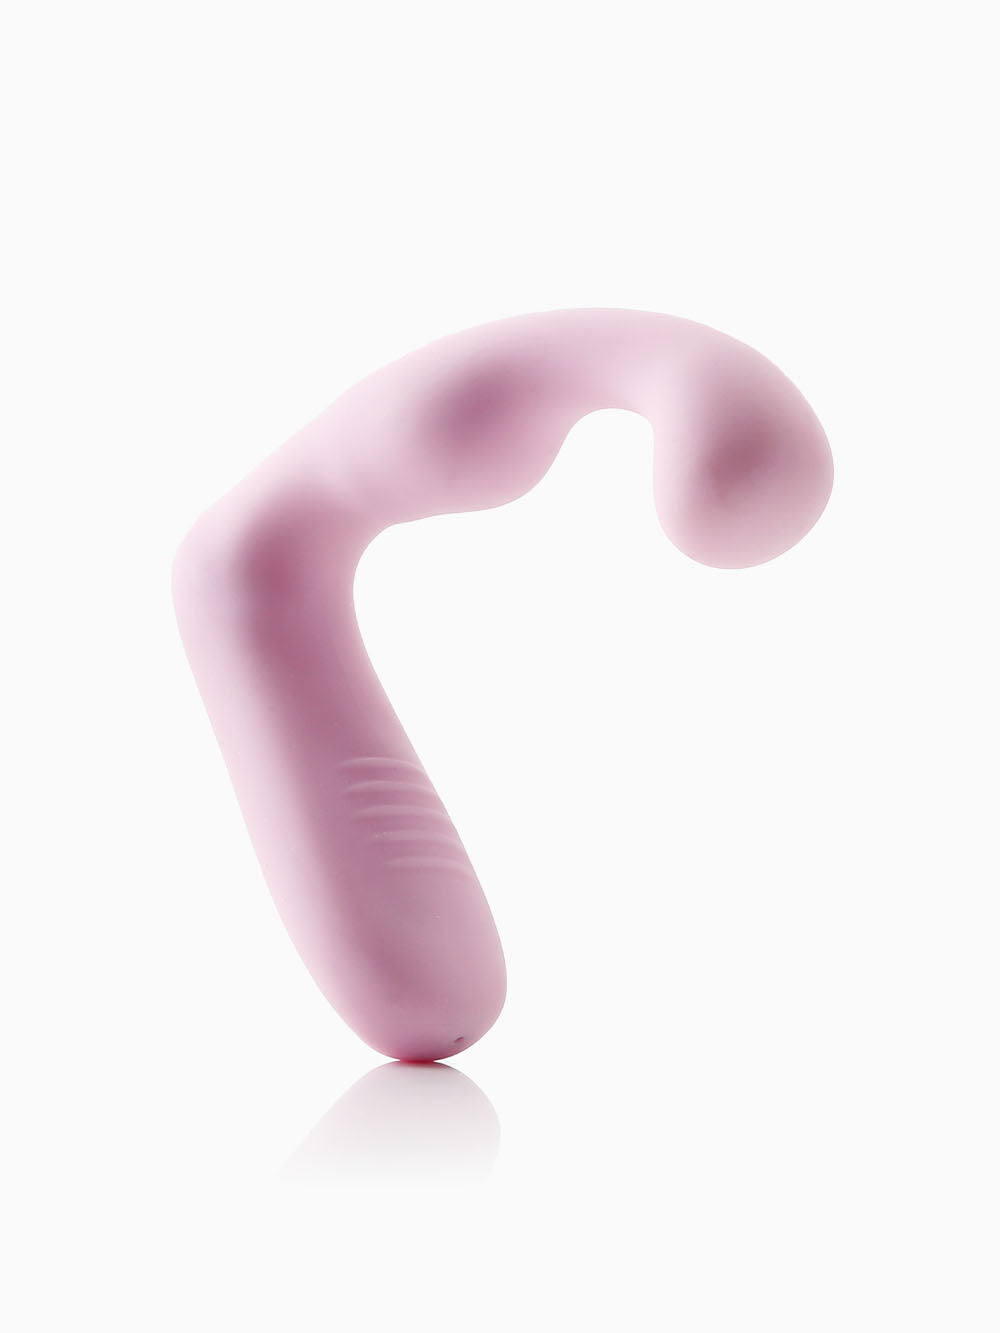 Pillow Talk Wearable G Spot & Clitoral Vibrator Pink, 3.75 Inches